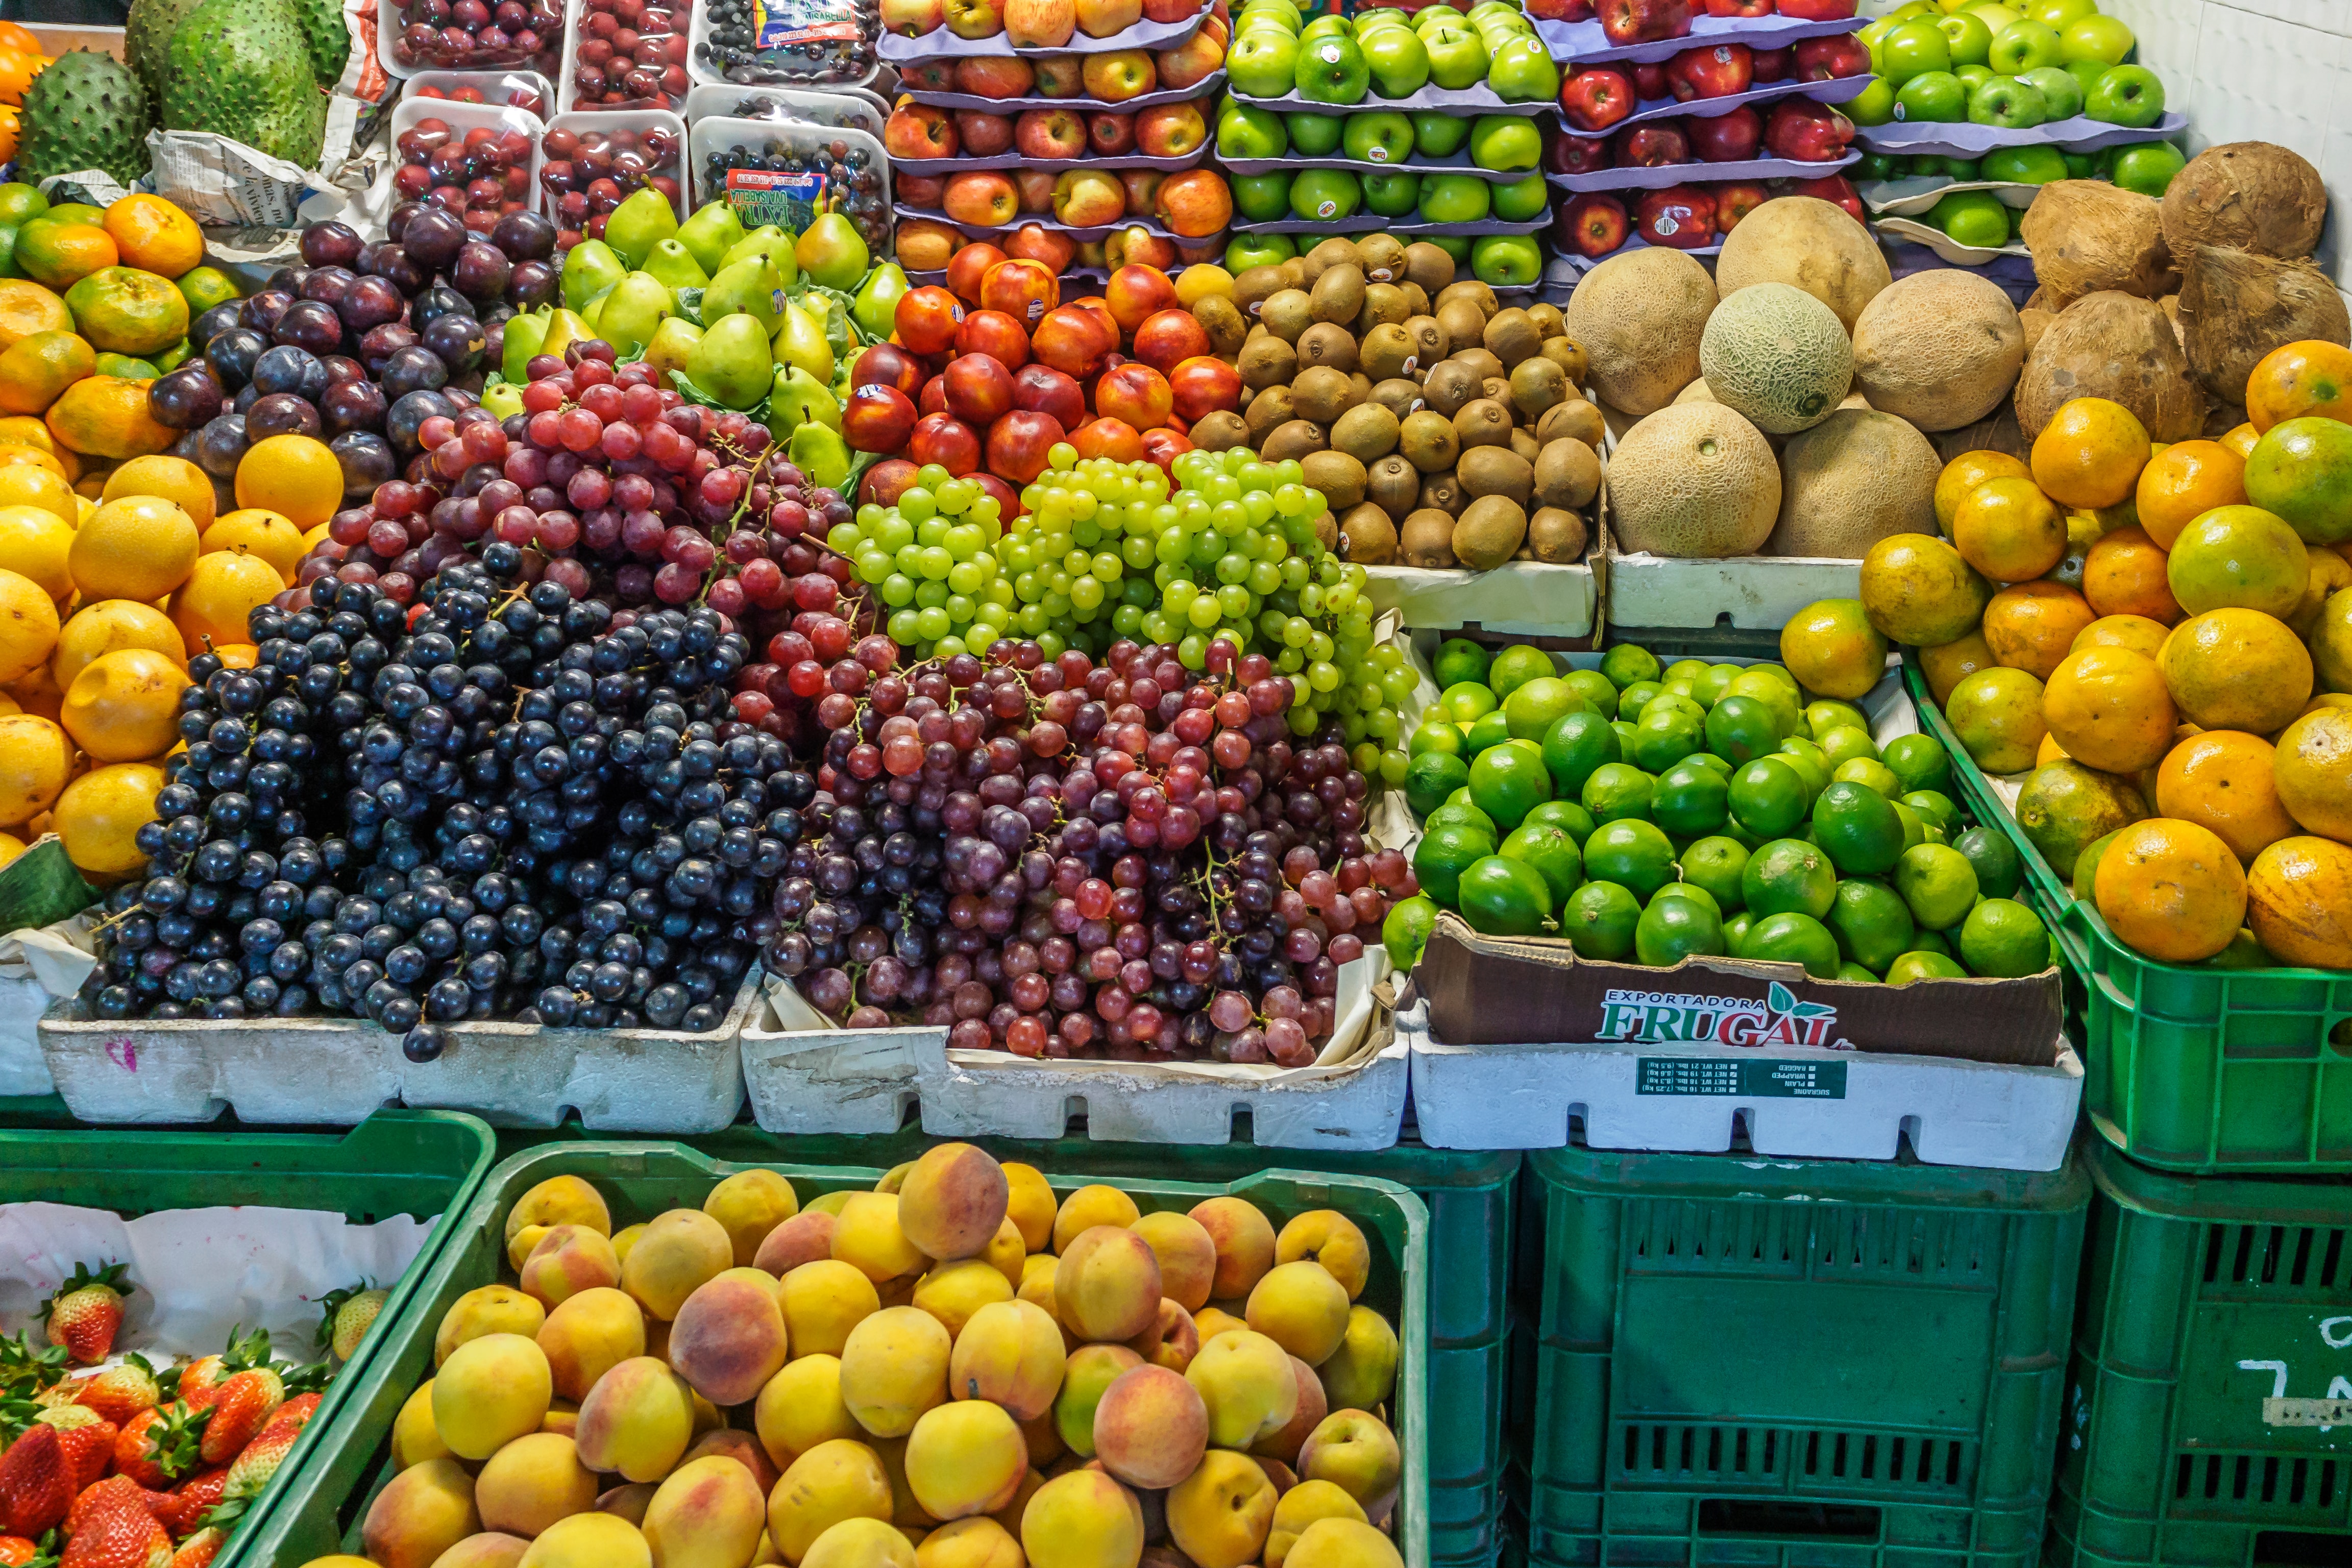 Colorful fruits in a market place glowing with health.